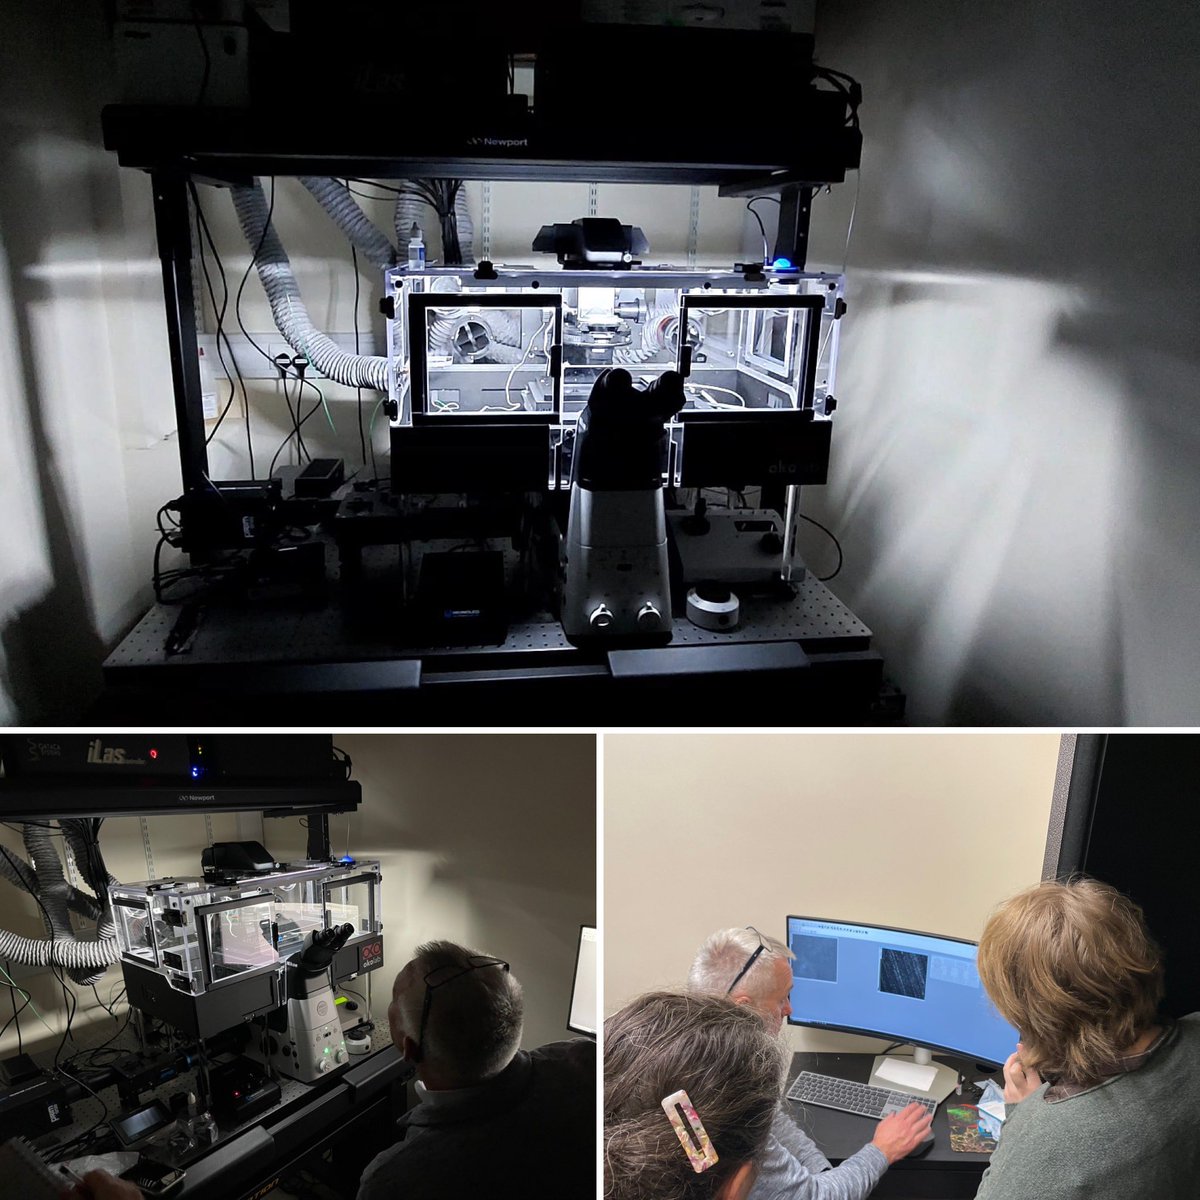 Another successful install of the @gatacasystems iLas TIRF FRAP system in combination with our @Cairn_Research OptoSplit II Bypass for single molecule localisation #singlemolecule #superresolution